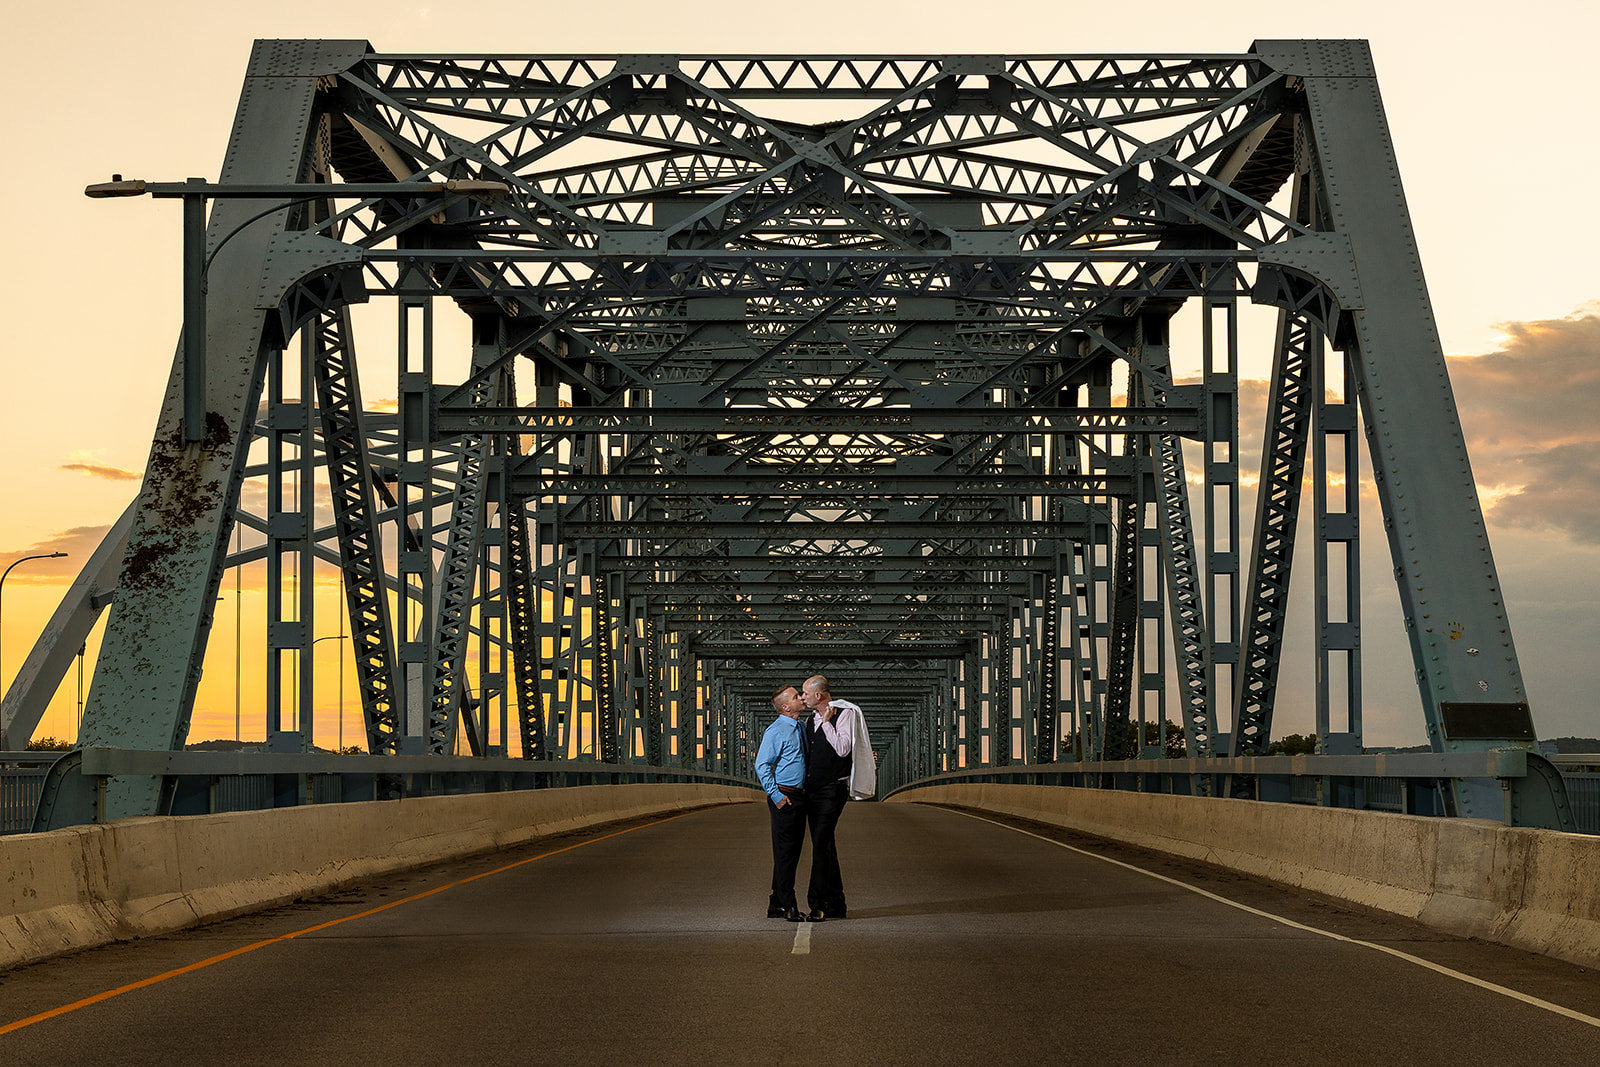 Iconic Views: Cass Street Bridge Engagement by Jeff Wiswell